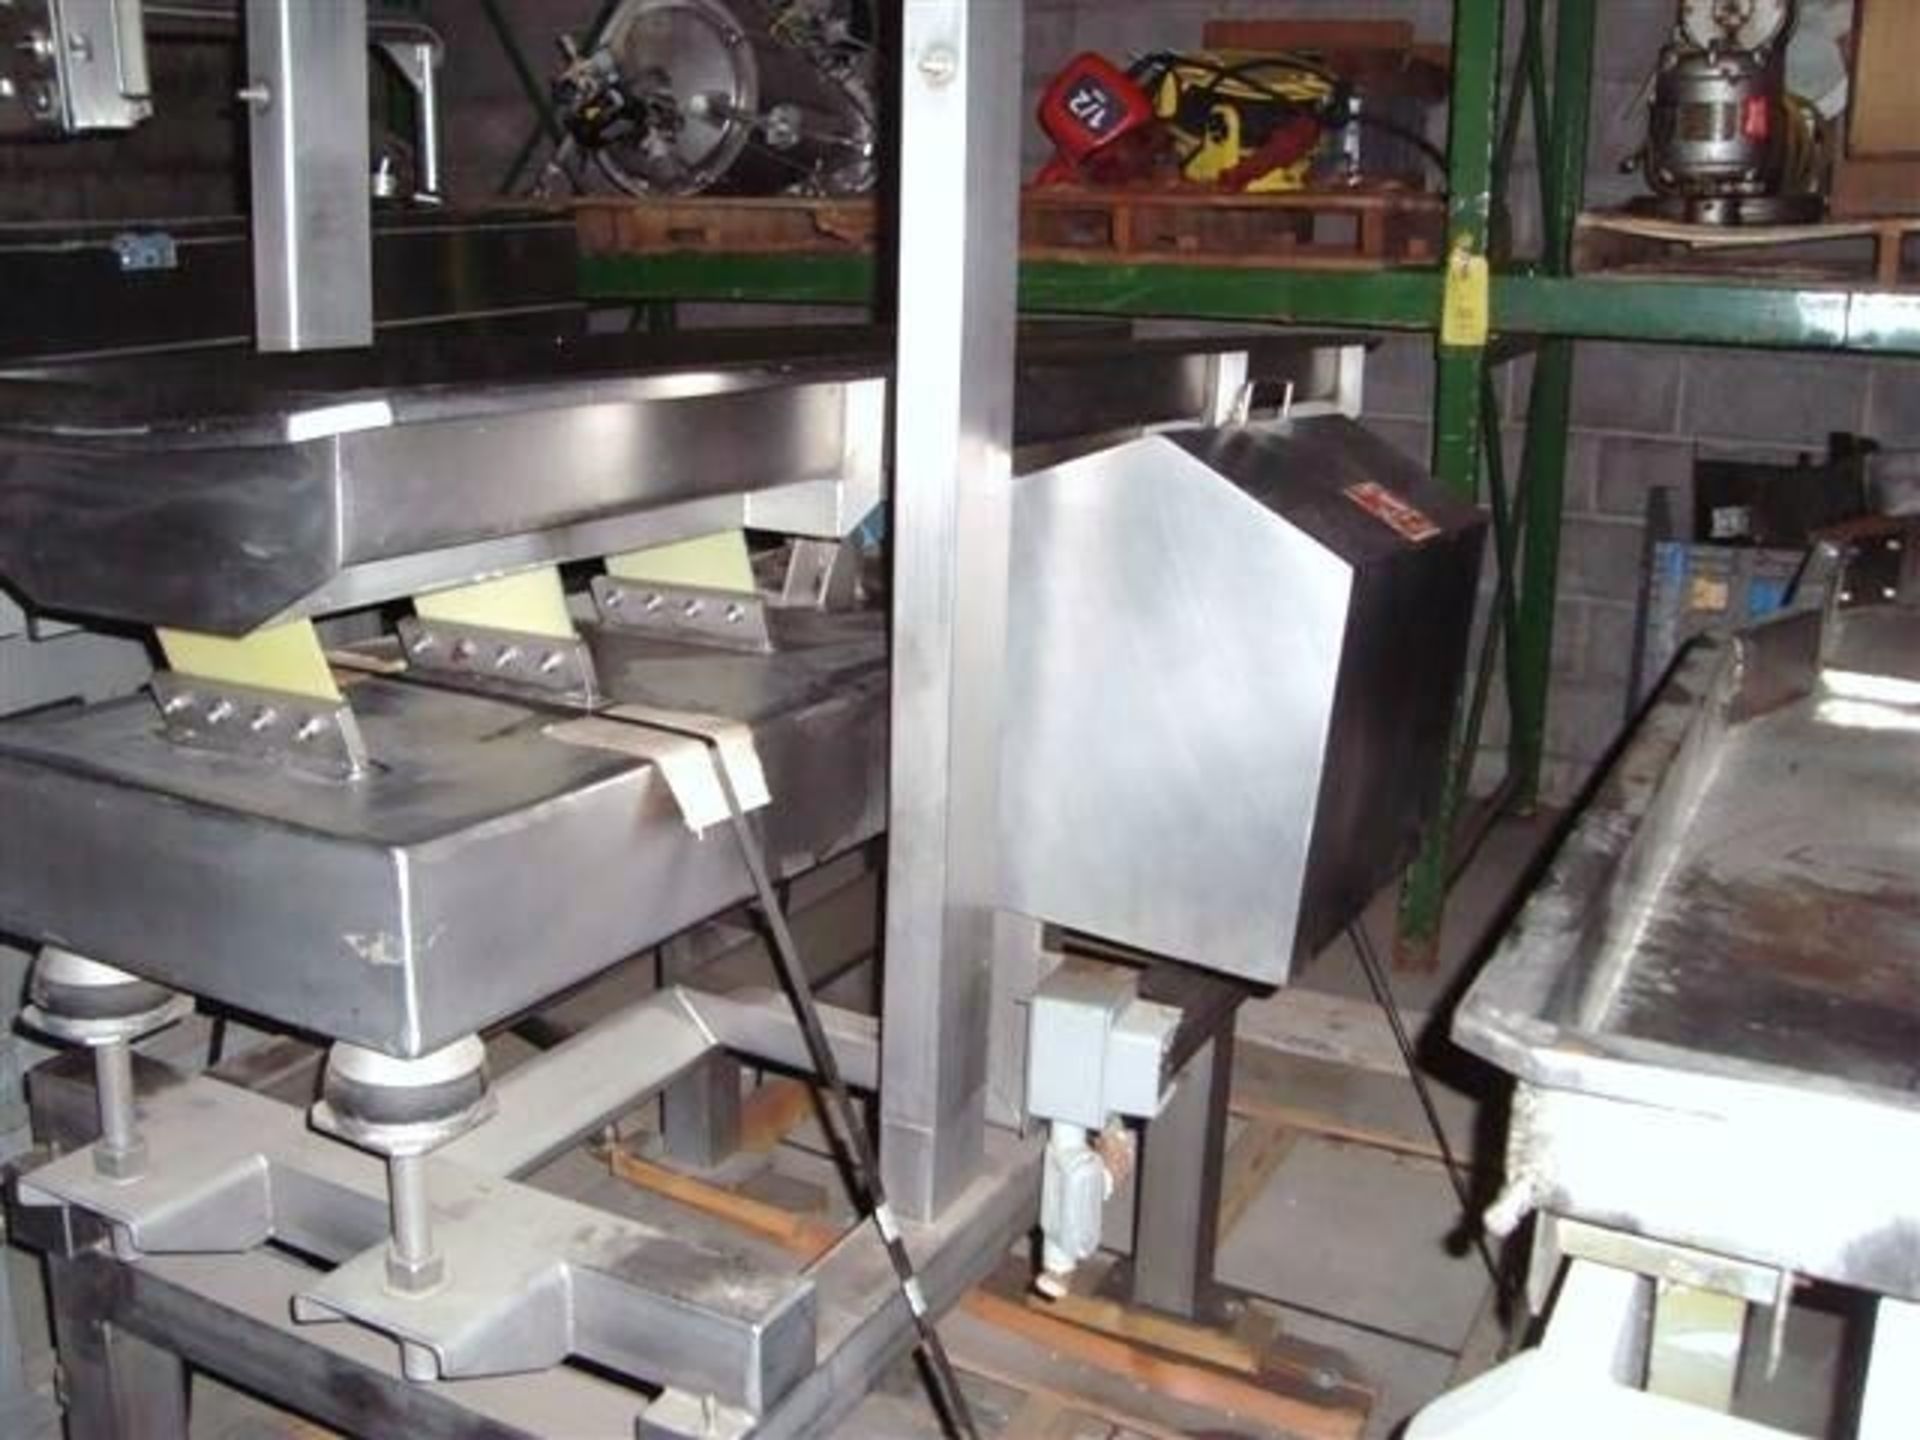 Smalley Vibratory S/S Feeder Conveyor, Model 1-V-015-007-SS-USDA, S/N 9108, Aprox.- 15" W x 84" L - Image 5 of 6